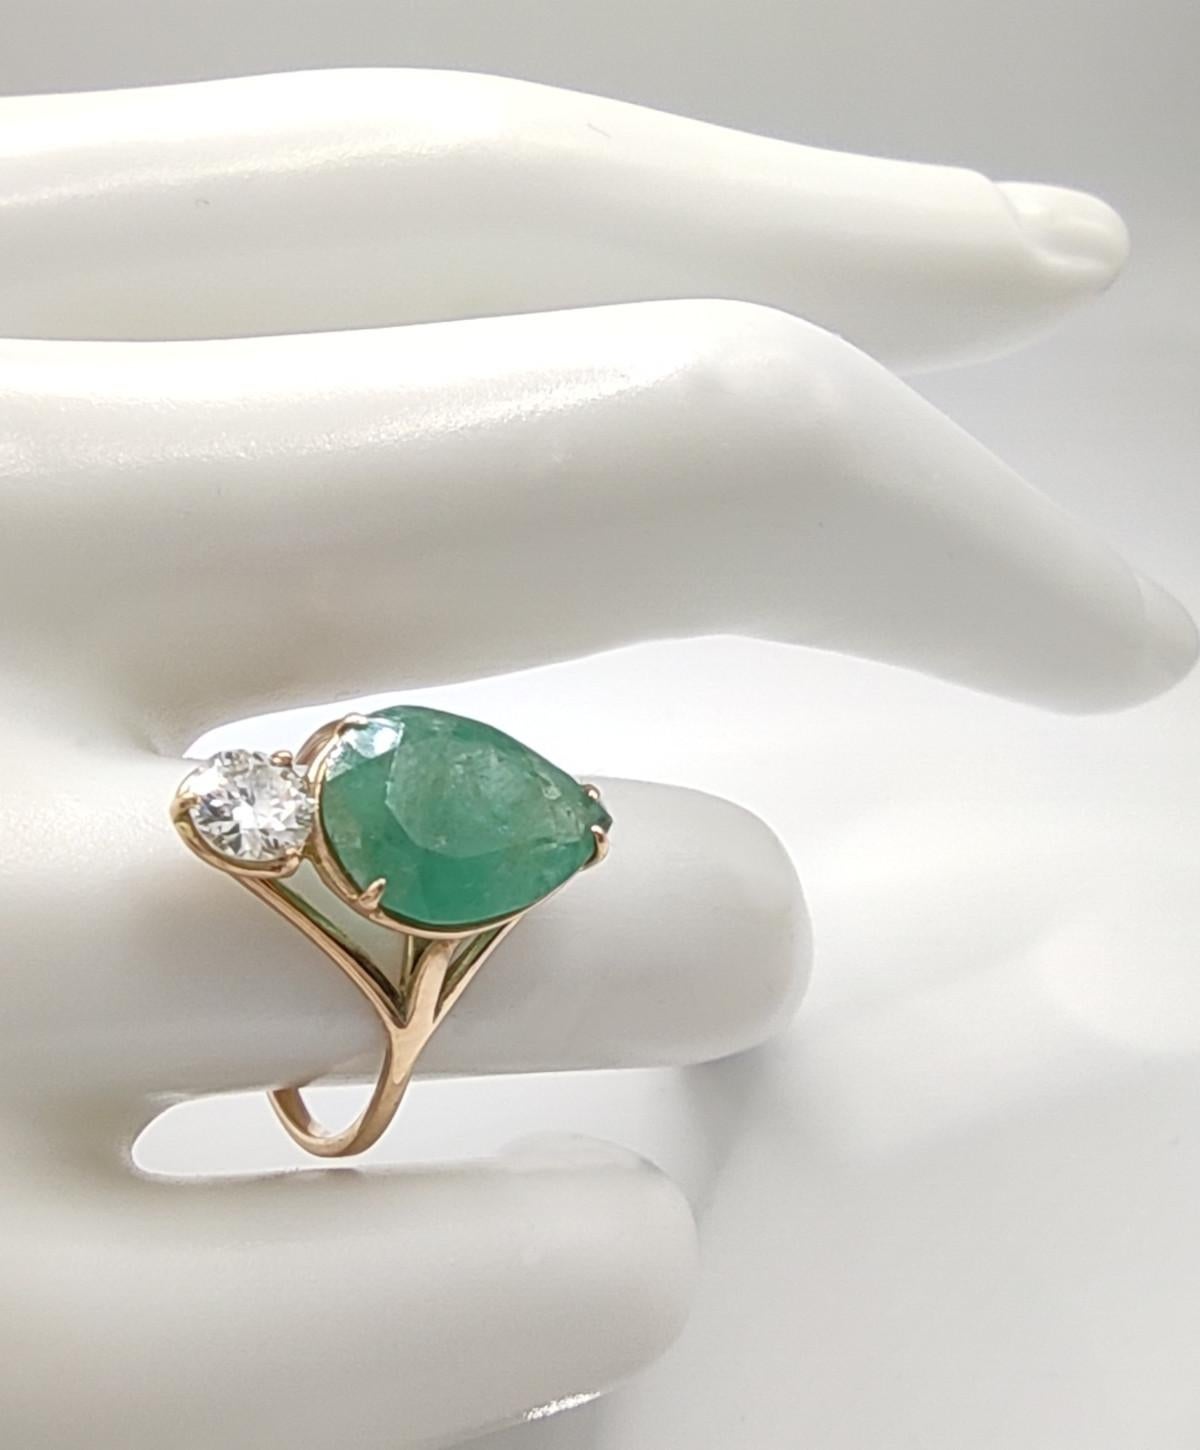 Handcrafted 14kt Yellow Gold Ring with Natural Emerald and Diamond - Unique Gem and Artisan Design

Technical Details:
- Type: Ring
- Gender: Woman
- Material: Yellow Gold
- Material Fineness: 14 karats
- European Size: 15, Inner Diameter 17.5
-